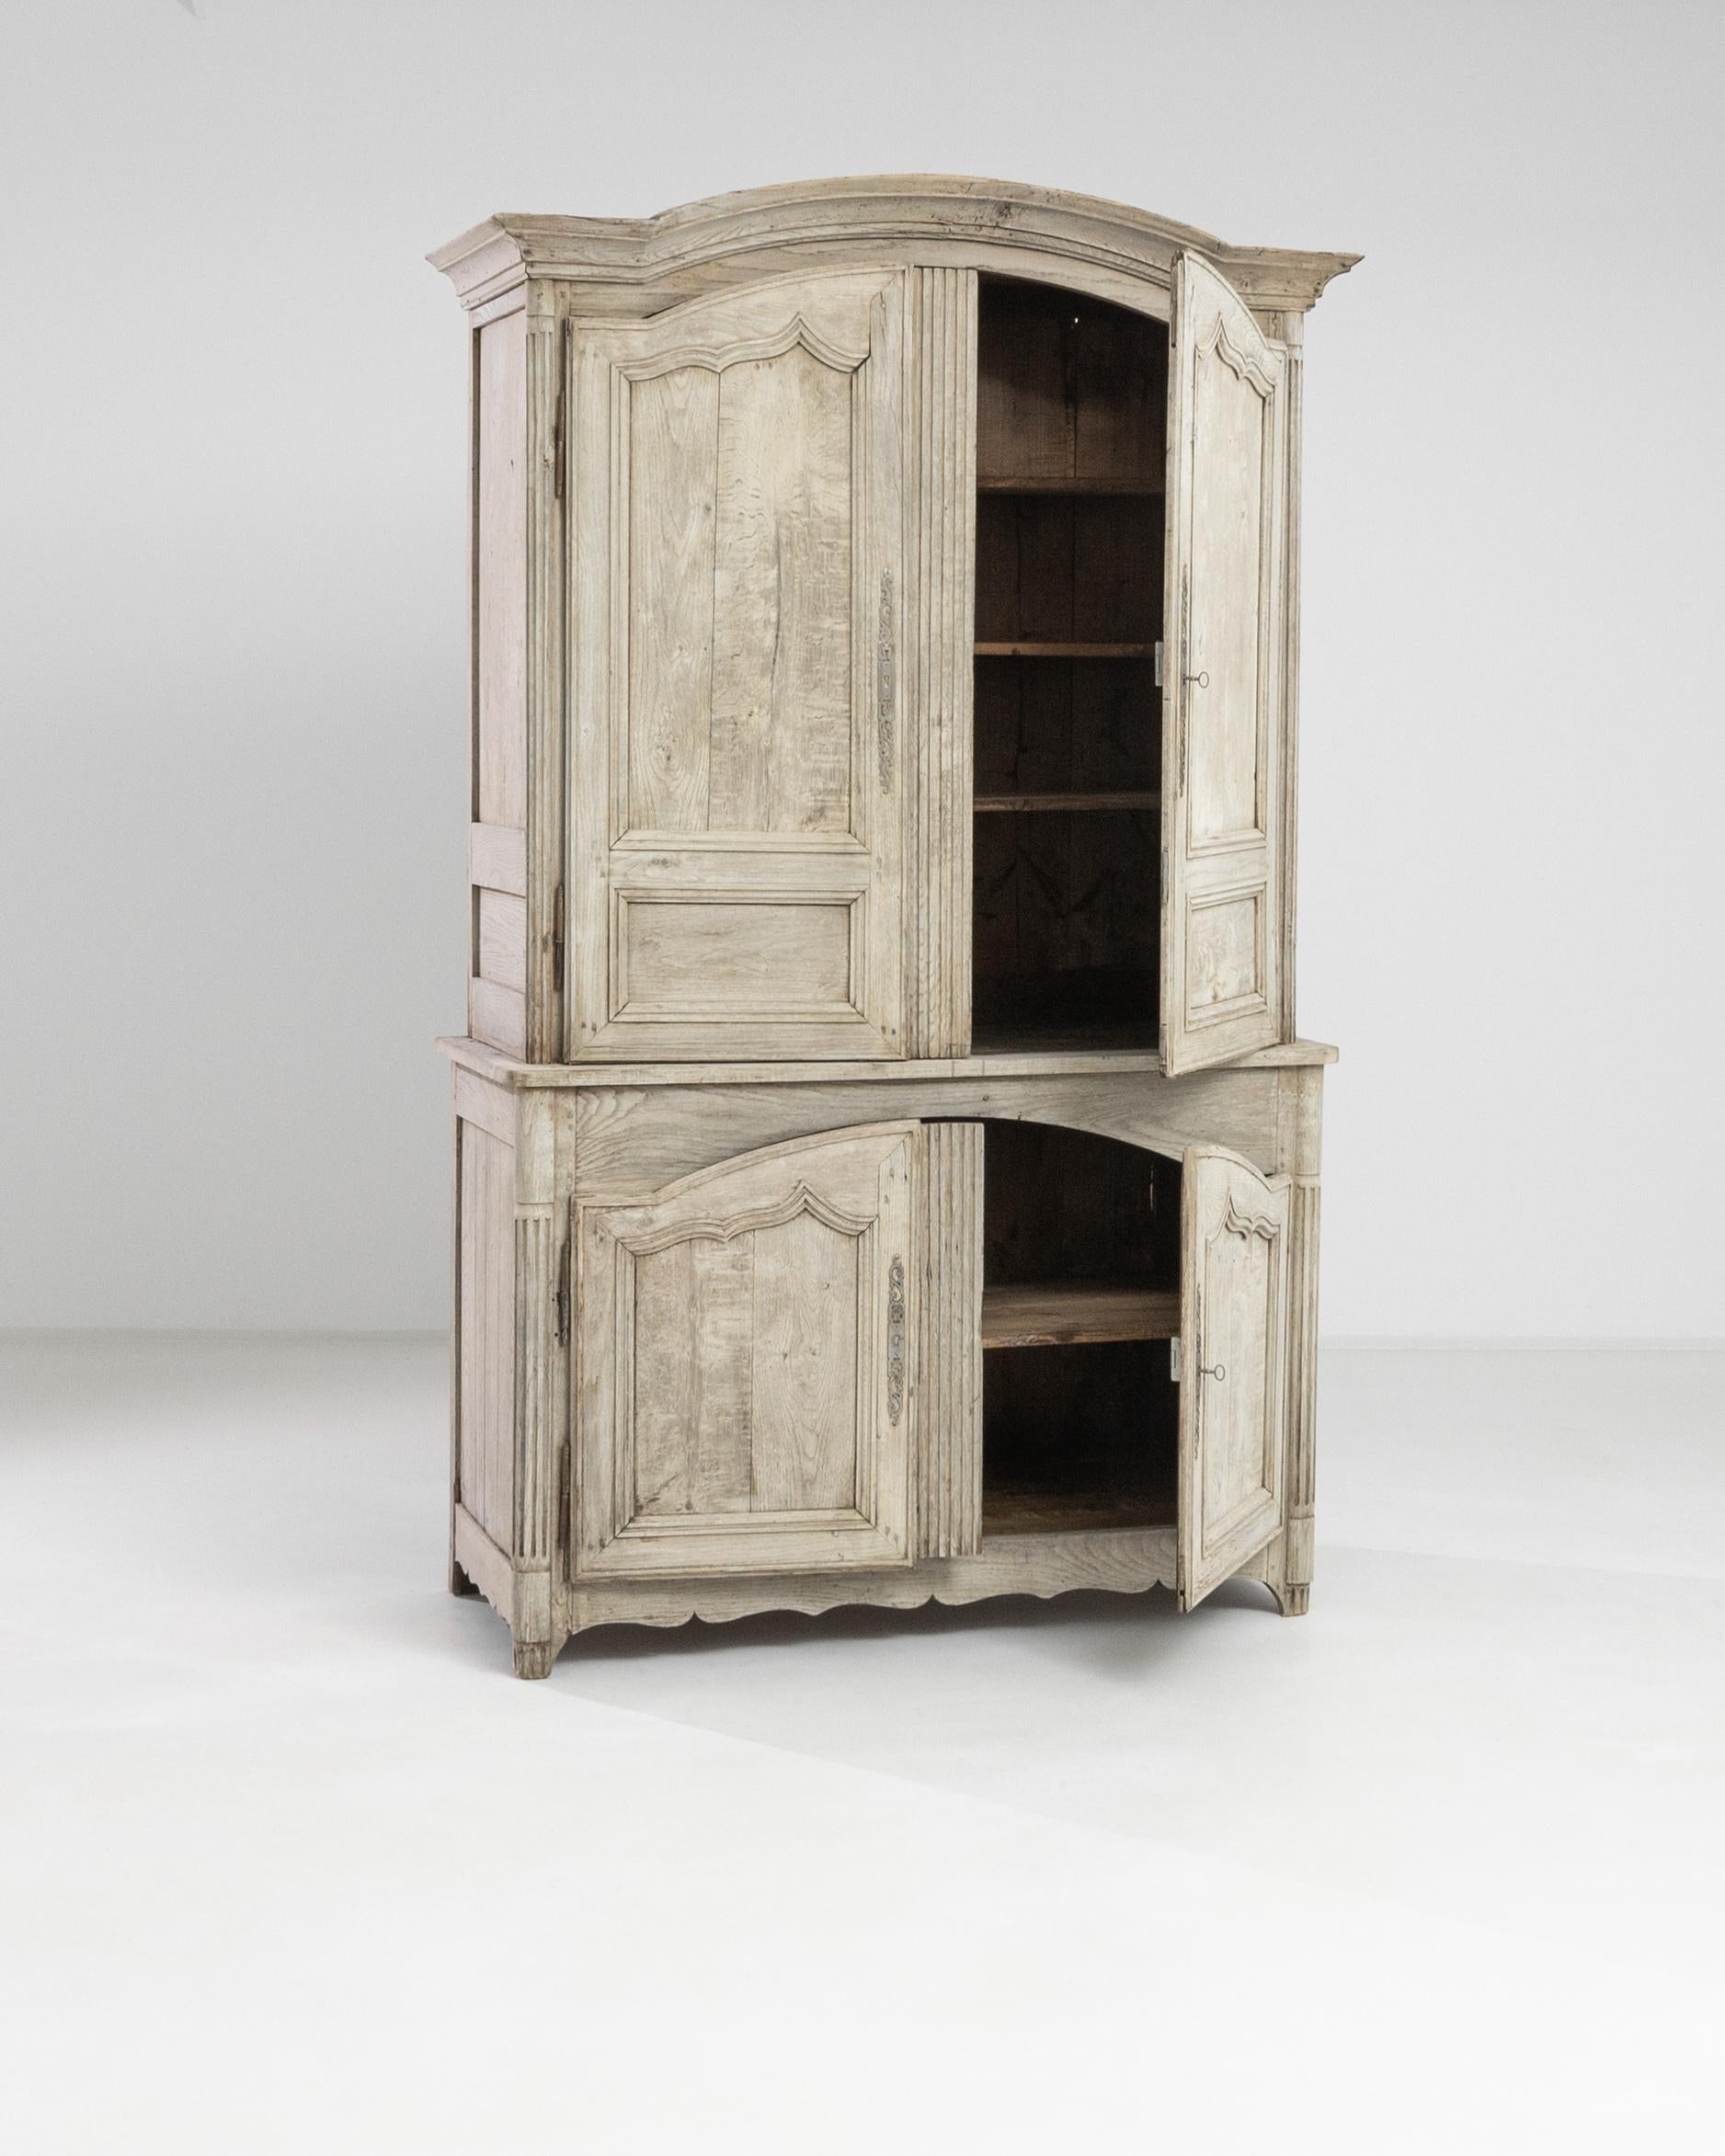 French Provincial 19th Century French Wooden Cabinet